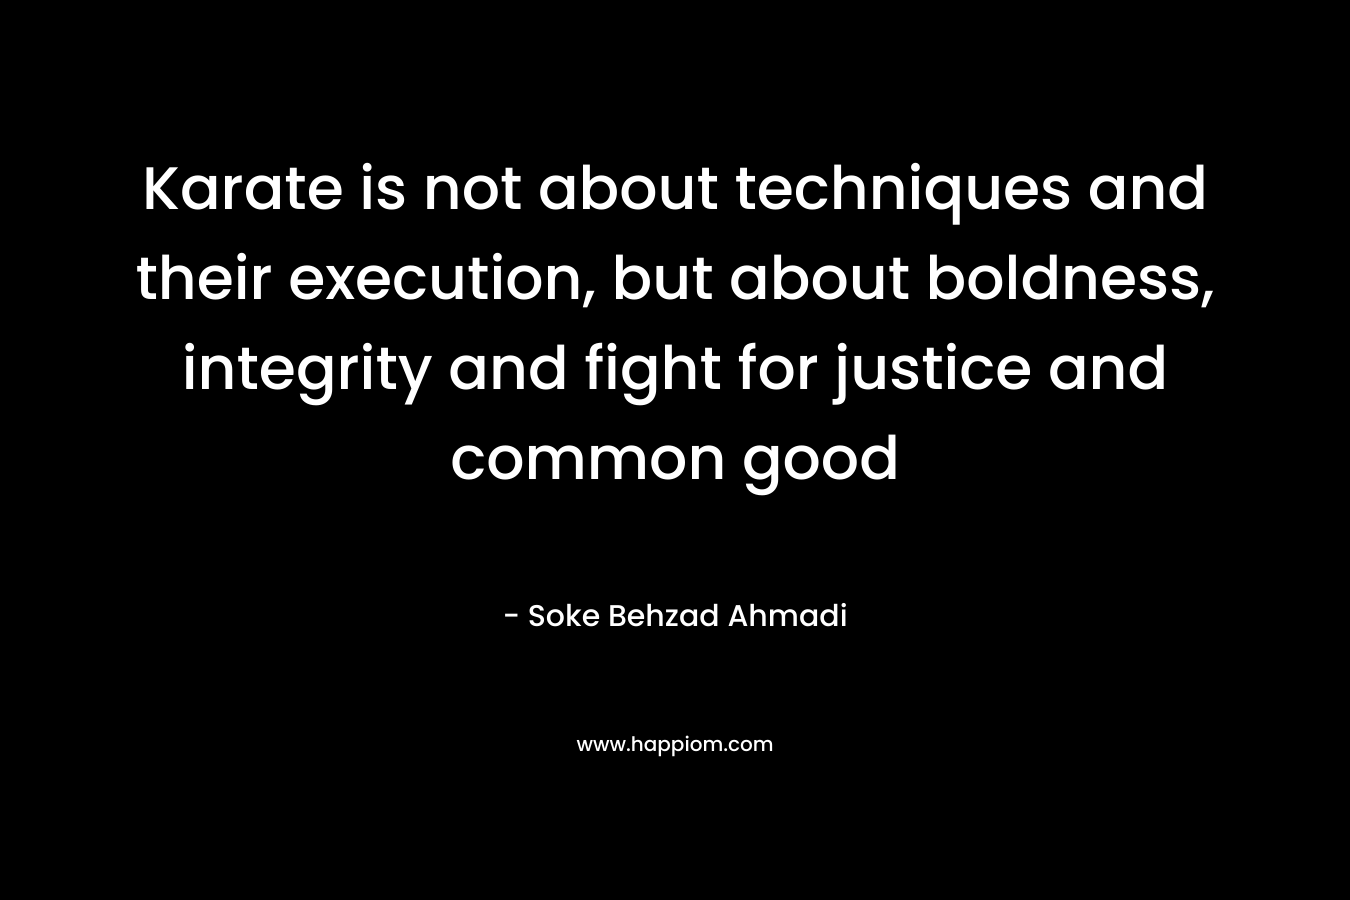 Karate is not about techniques and their execution, but about boldness, integrity and fight for justice and common good – Soke Behzad Ahmadi